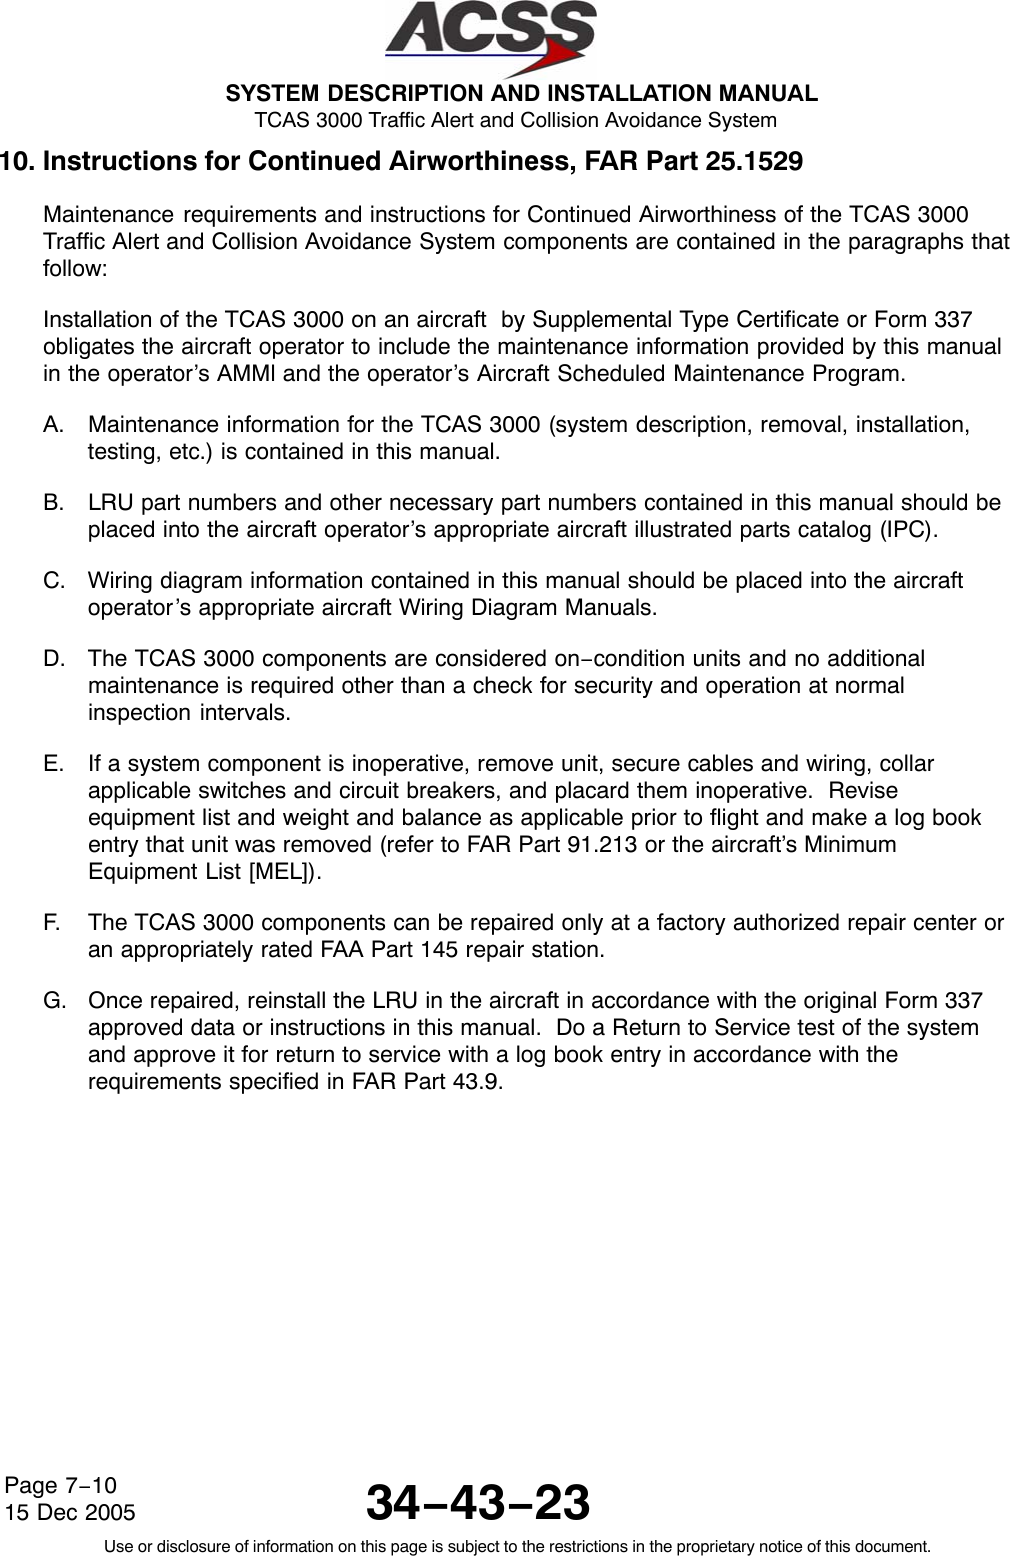  SYSTEM DESCRIPTION AND INSTALLATION MANUAL TCAS 3000 Traffic Alert and Collision Avoidance System34−43−23Use or disclosure of information on this page is subject to the restrictions in the proprietary notice of this document.Page 7−1015 Dec 200510. Instructions for Continued Airworthiness, FAR Part 25.1529Maintenance requirements and instructions for Continued Airworthiness of the TCAS 3000Traffic Alert and Collision Avoidance System components are contained in the paragraphs thatfollow:Installation of the TCAS 3000 on an aircraft  by Supplemental Type Certificate or Form 337obligates the aircraft operator to include the maintenance information provided by this manualin the operator’s AMMl and the operator’s Aircraft Scheduled Maintenance Program.A. Maintenance information for the TCAS 3000 (system description, removal, installation,testing, etc.) is contained in this manual.B. LRU part numbers and other necessary part numbers contained in this manual should beplaced into the aircraft operator’s appropriate aircraft illustrated parts catalog (IPC).C. Wiring diagram information contained in this manual should be placed into the aircraftoperator’s appropriate aircraft Wiring Diagram Manuals.D. The TCAS 3000 components are considered on−condition units and no additionalmaintenance is required other than a check for security and operation at normalinspection intervals.E. If a system component is inoperative, remove unit, secure cables and wiring, collarapplicable switches and circuit breakers, and placard them inoperative.  Reviseequipment list and weight and balance as applicable prior to flight and make a log bookentry that unit was removed (refer to FAR Part 91.213 or the aircraft’s MinimumEquipment List [MEL]).F. The TCAS 3000 components can be repaired only at a factory authorized repair center oran appropriately rated FAA Part 145 repair station.G. Once repaired, reinstall the LRU in the aircraft in accordance with the original Form 337approved data or instructions in this manual.  Do a Return to Service test of the systemand approve it for return to service with a log book entry in accordance with therequirements specified in FAR Part 43.9.